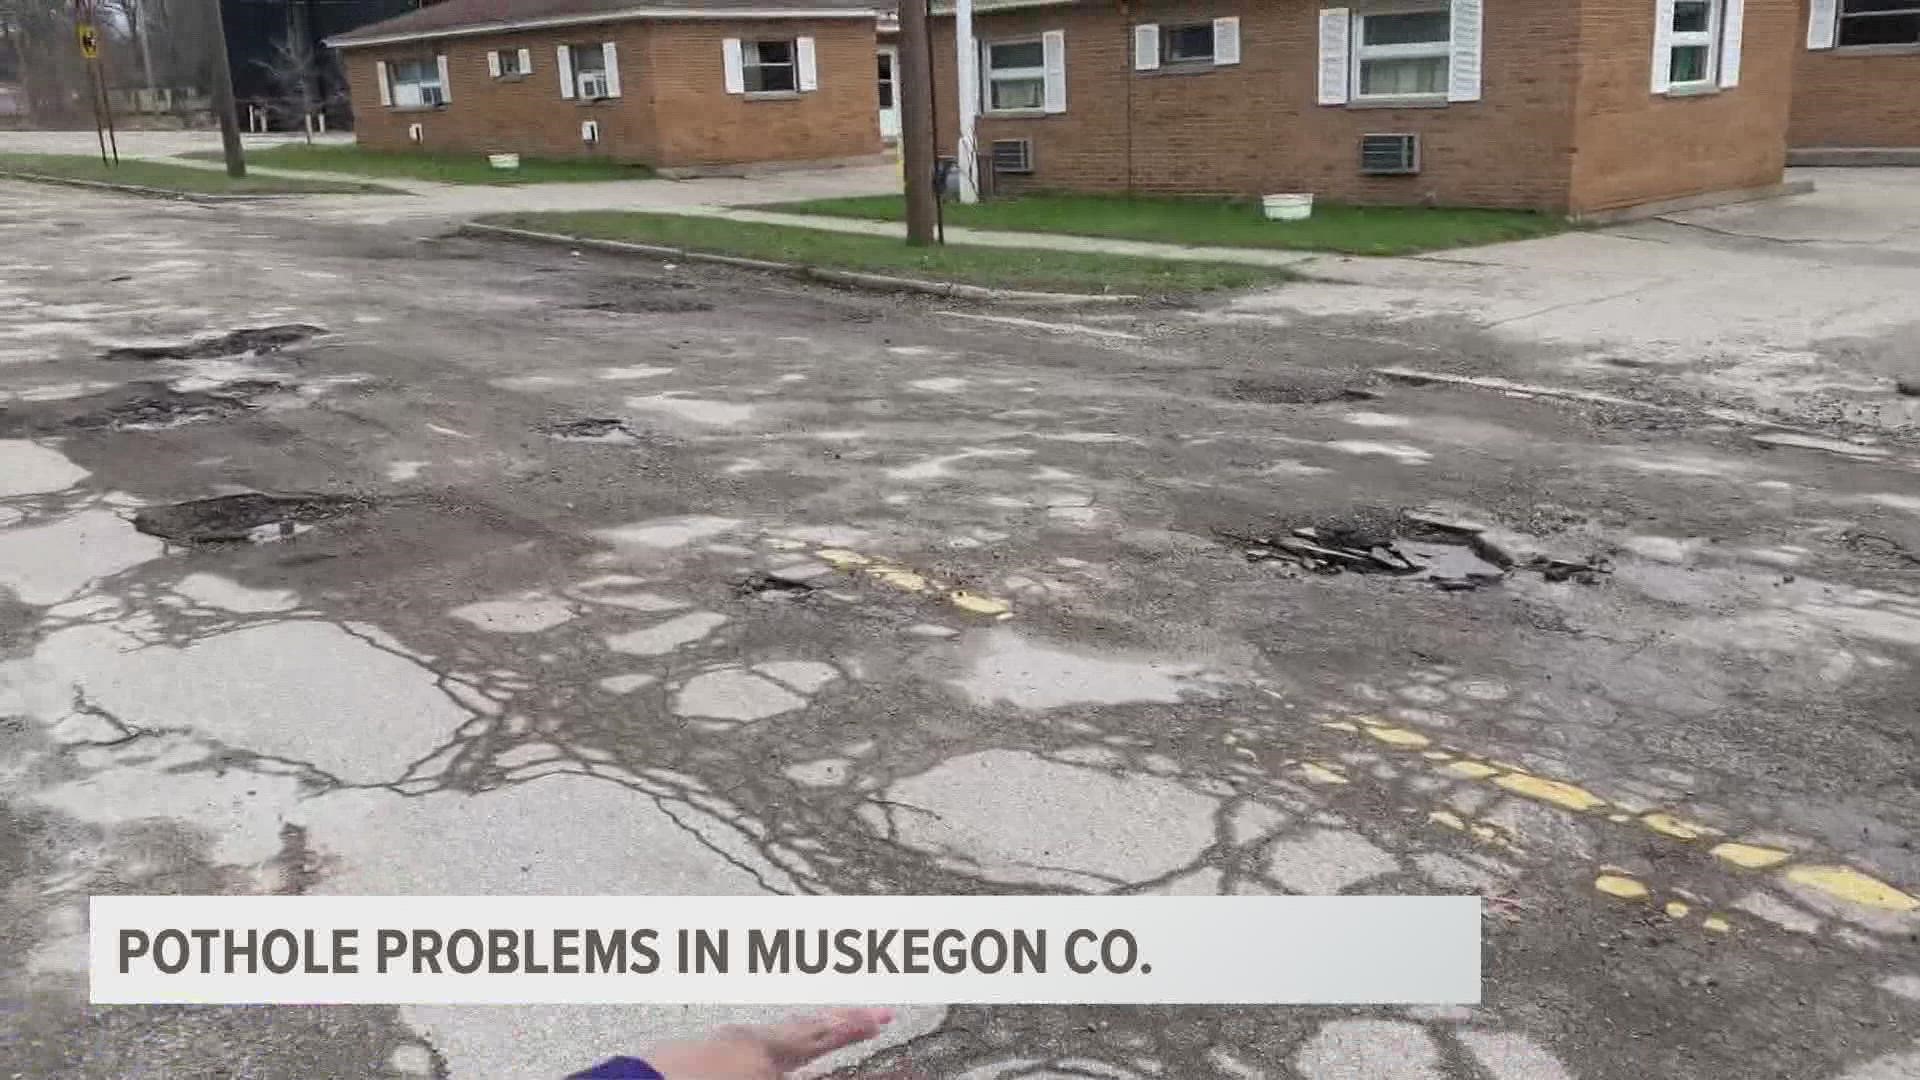 Viewer Tacara Nicholson told 13OYS recent pothole-related repairs had cost her around $1200.